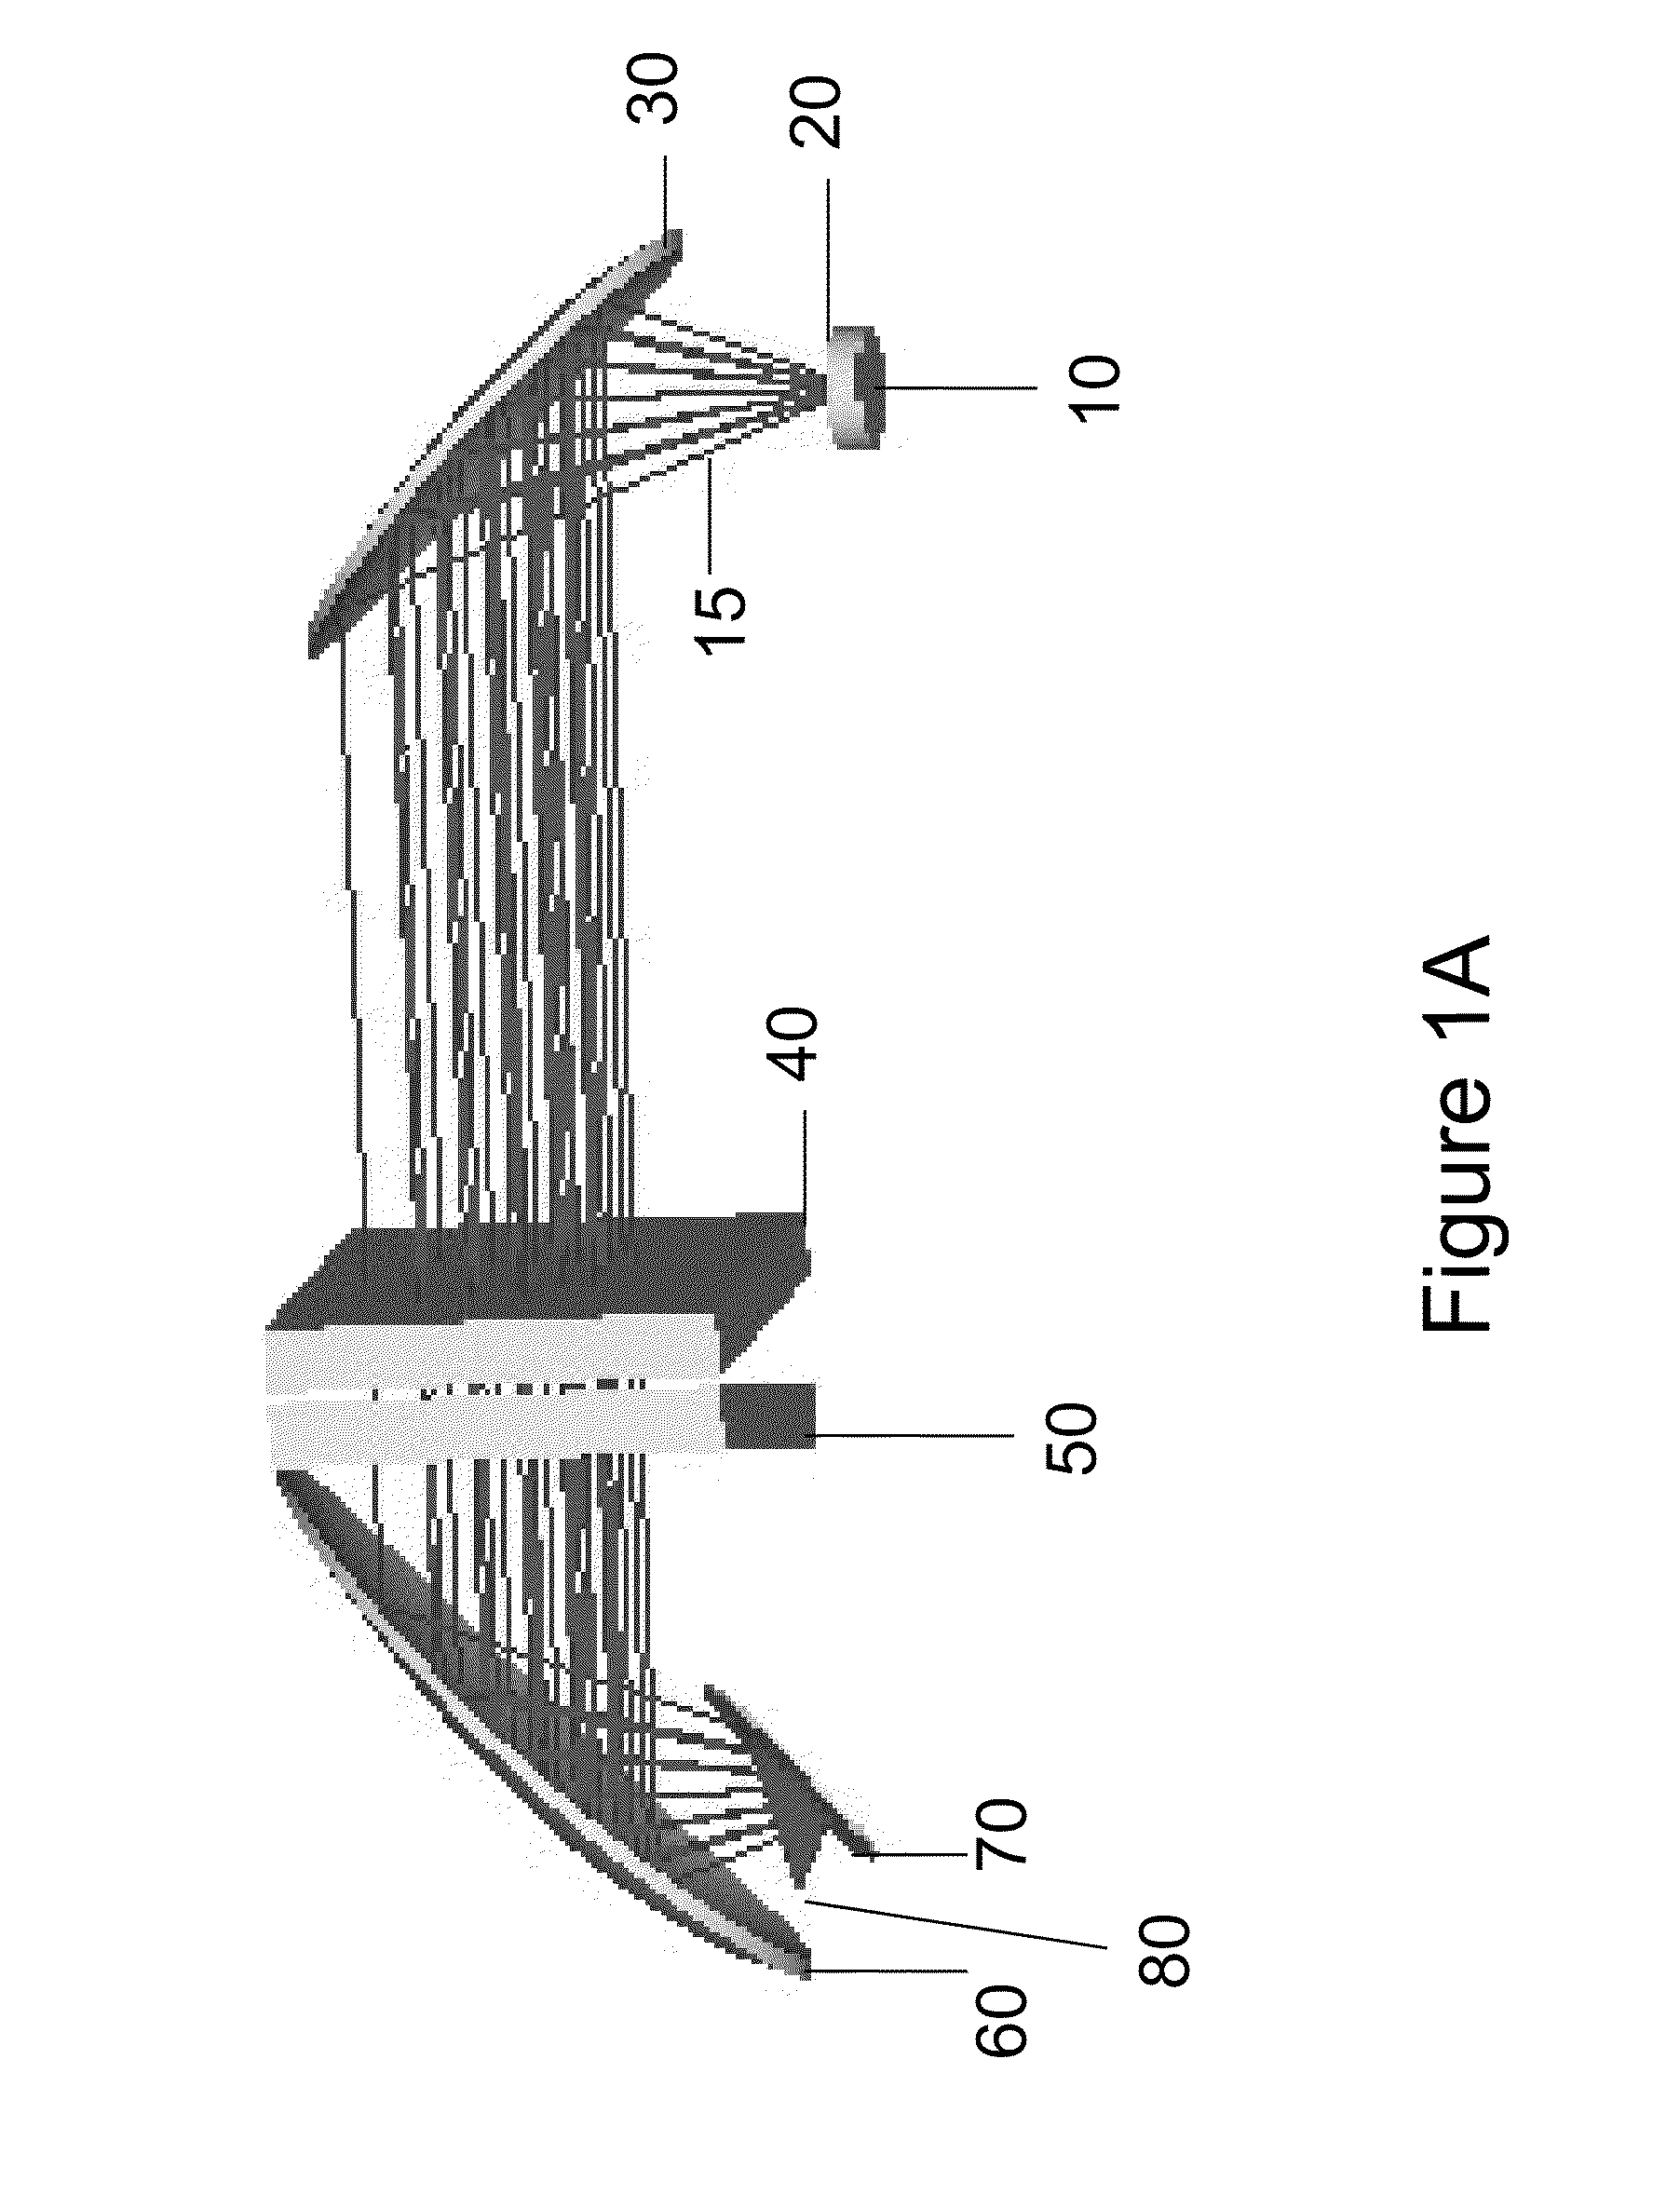 All Reflective Apparatus for Injecting Excitation Light and Collecting In-elastically Scattered Light from a Sample